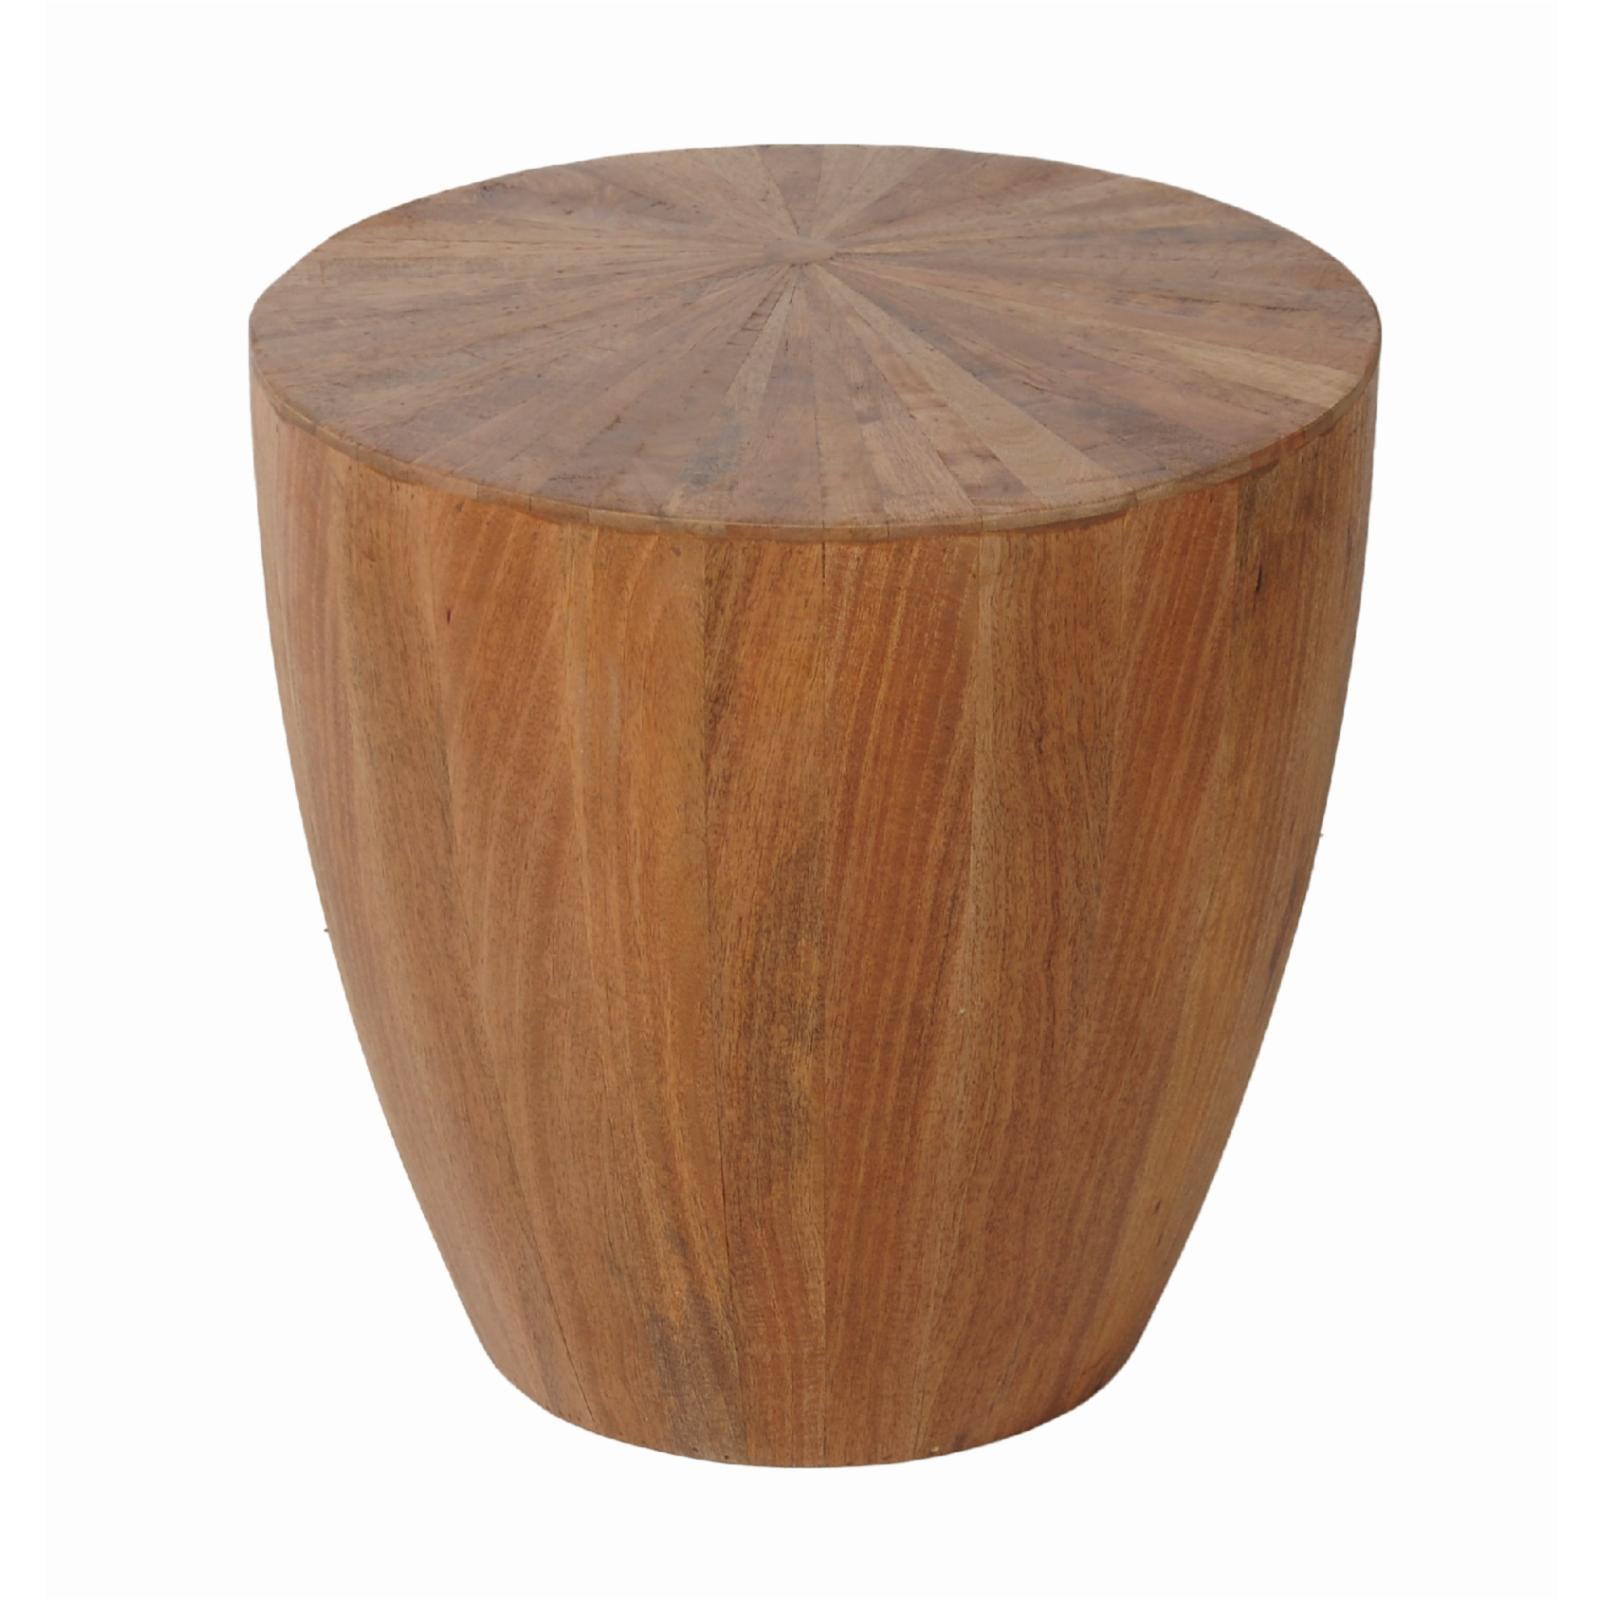 Del Sol 18" Brown Mango Wood Round End Table